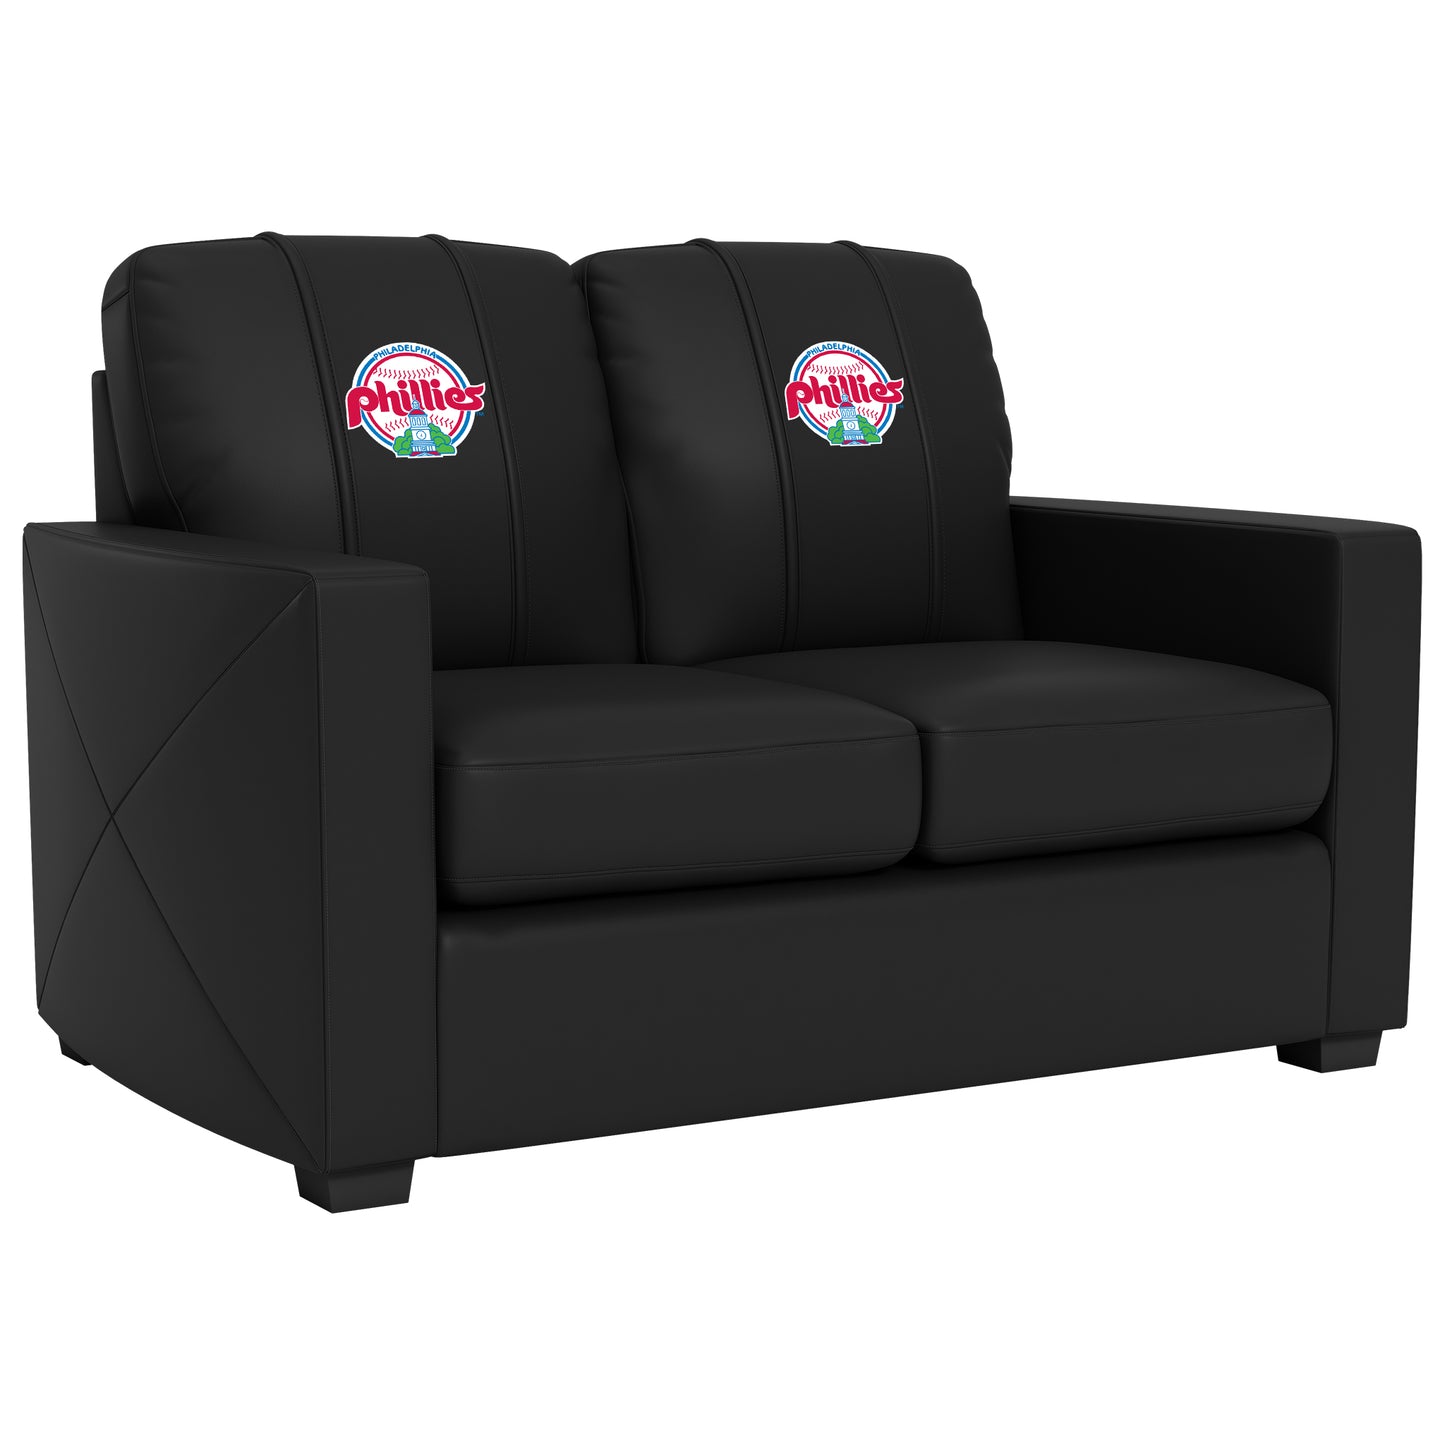 Silver Loveseat with Philadelphia Phillies Cooperstown Primary